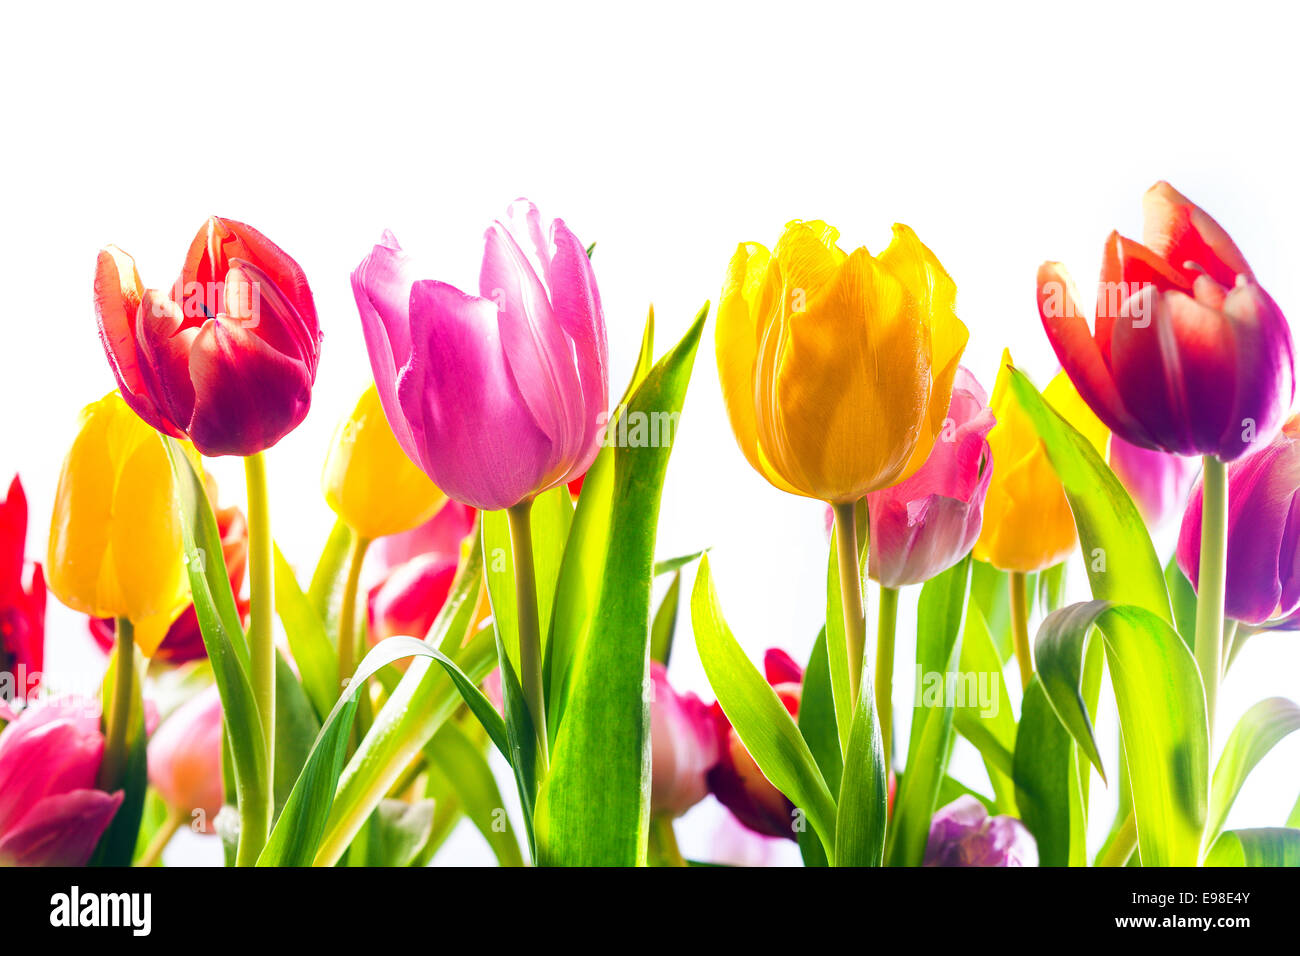 Vibrant background of colourful spring tulips in red, yellow and pink with their fresh green leaves isolated on a white background Stock Photo